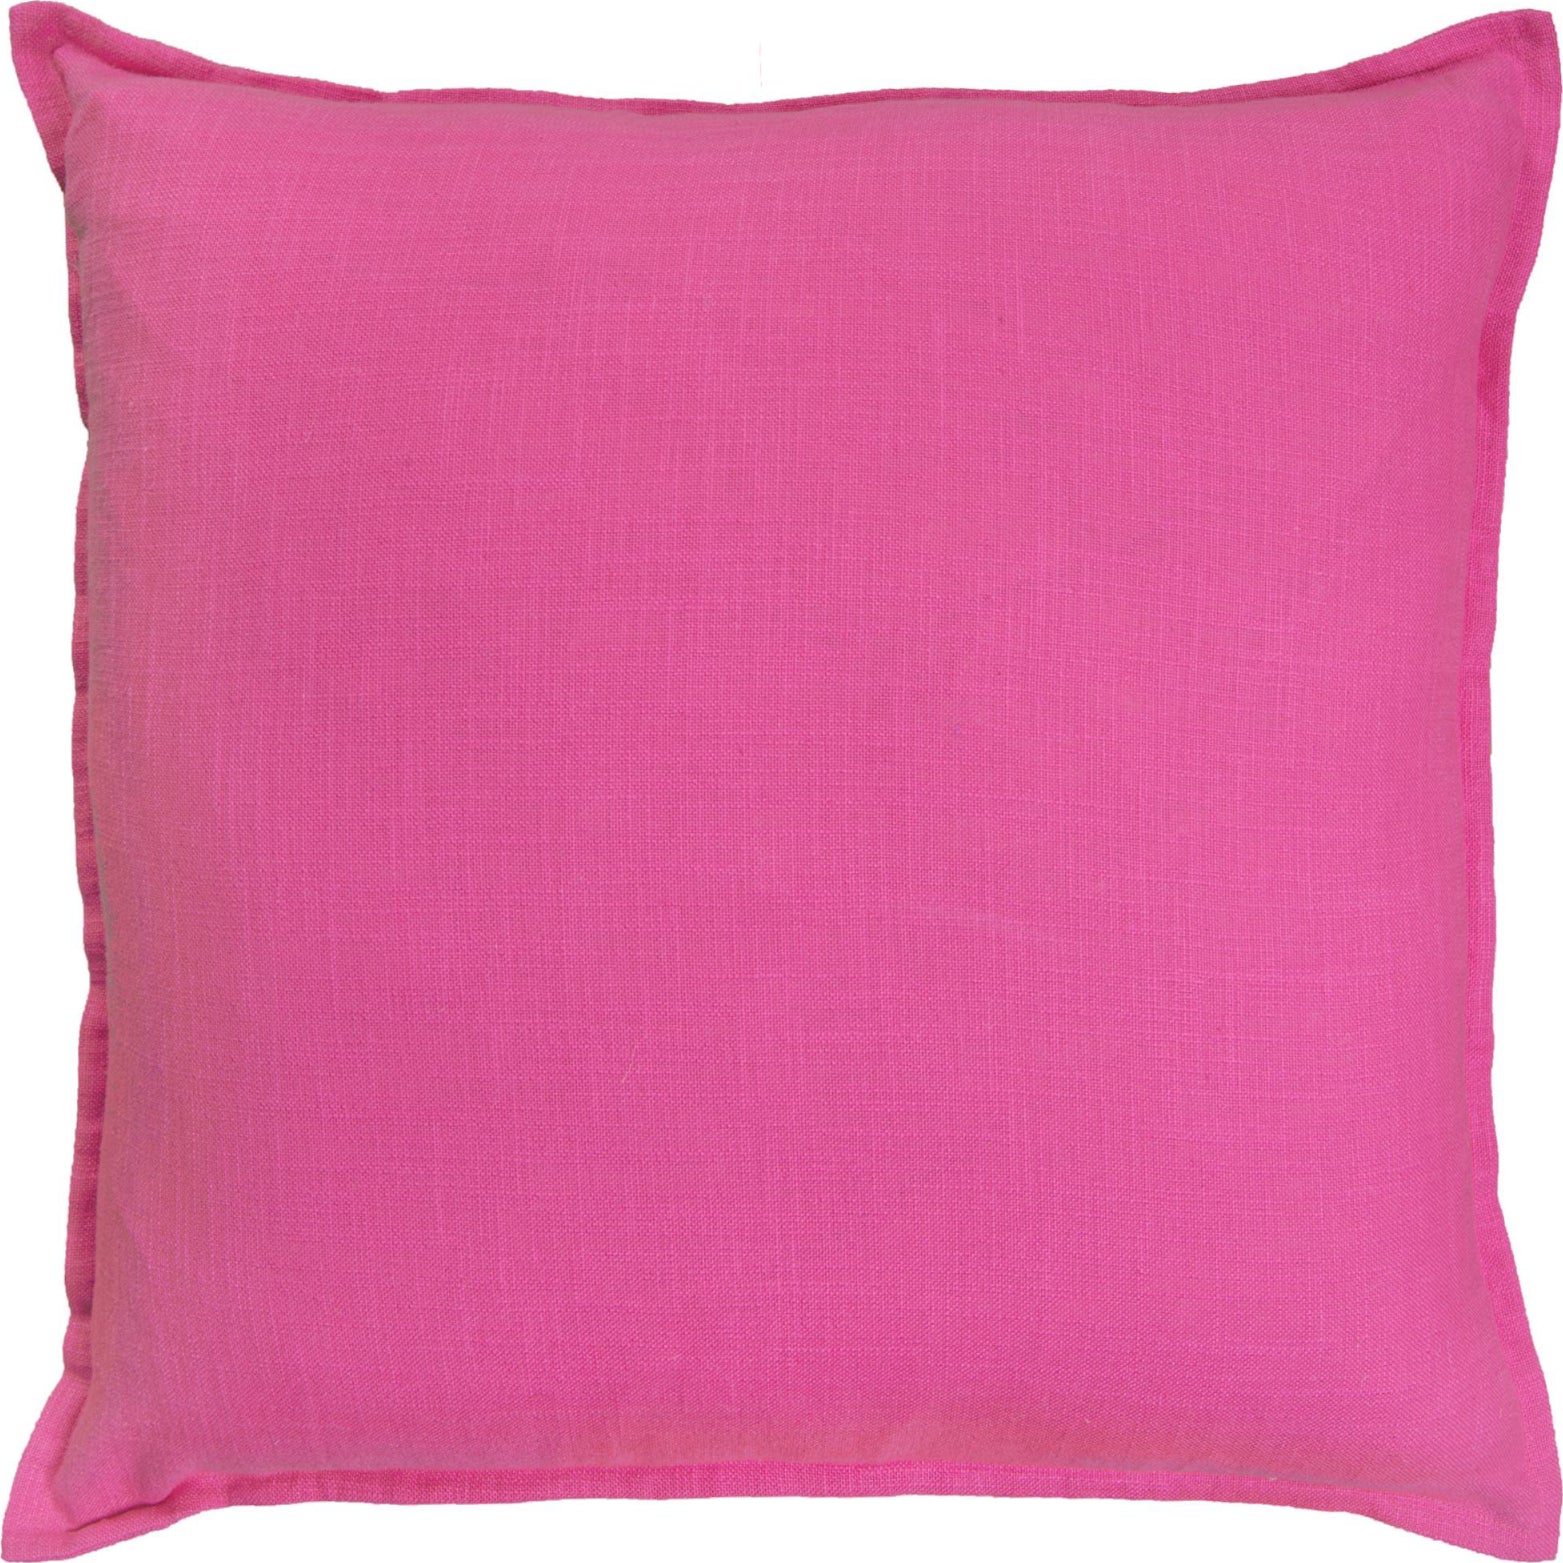 Rizzy Pillows T05734 Hot Pink